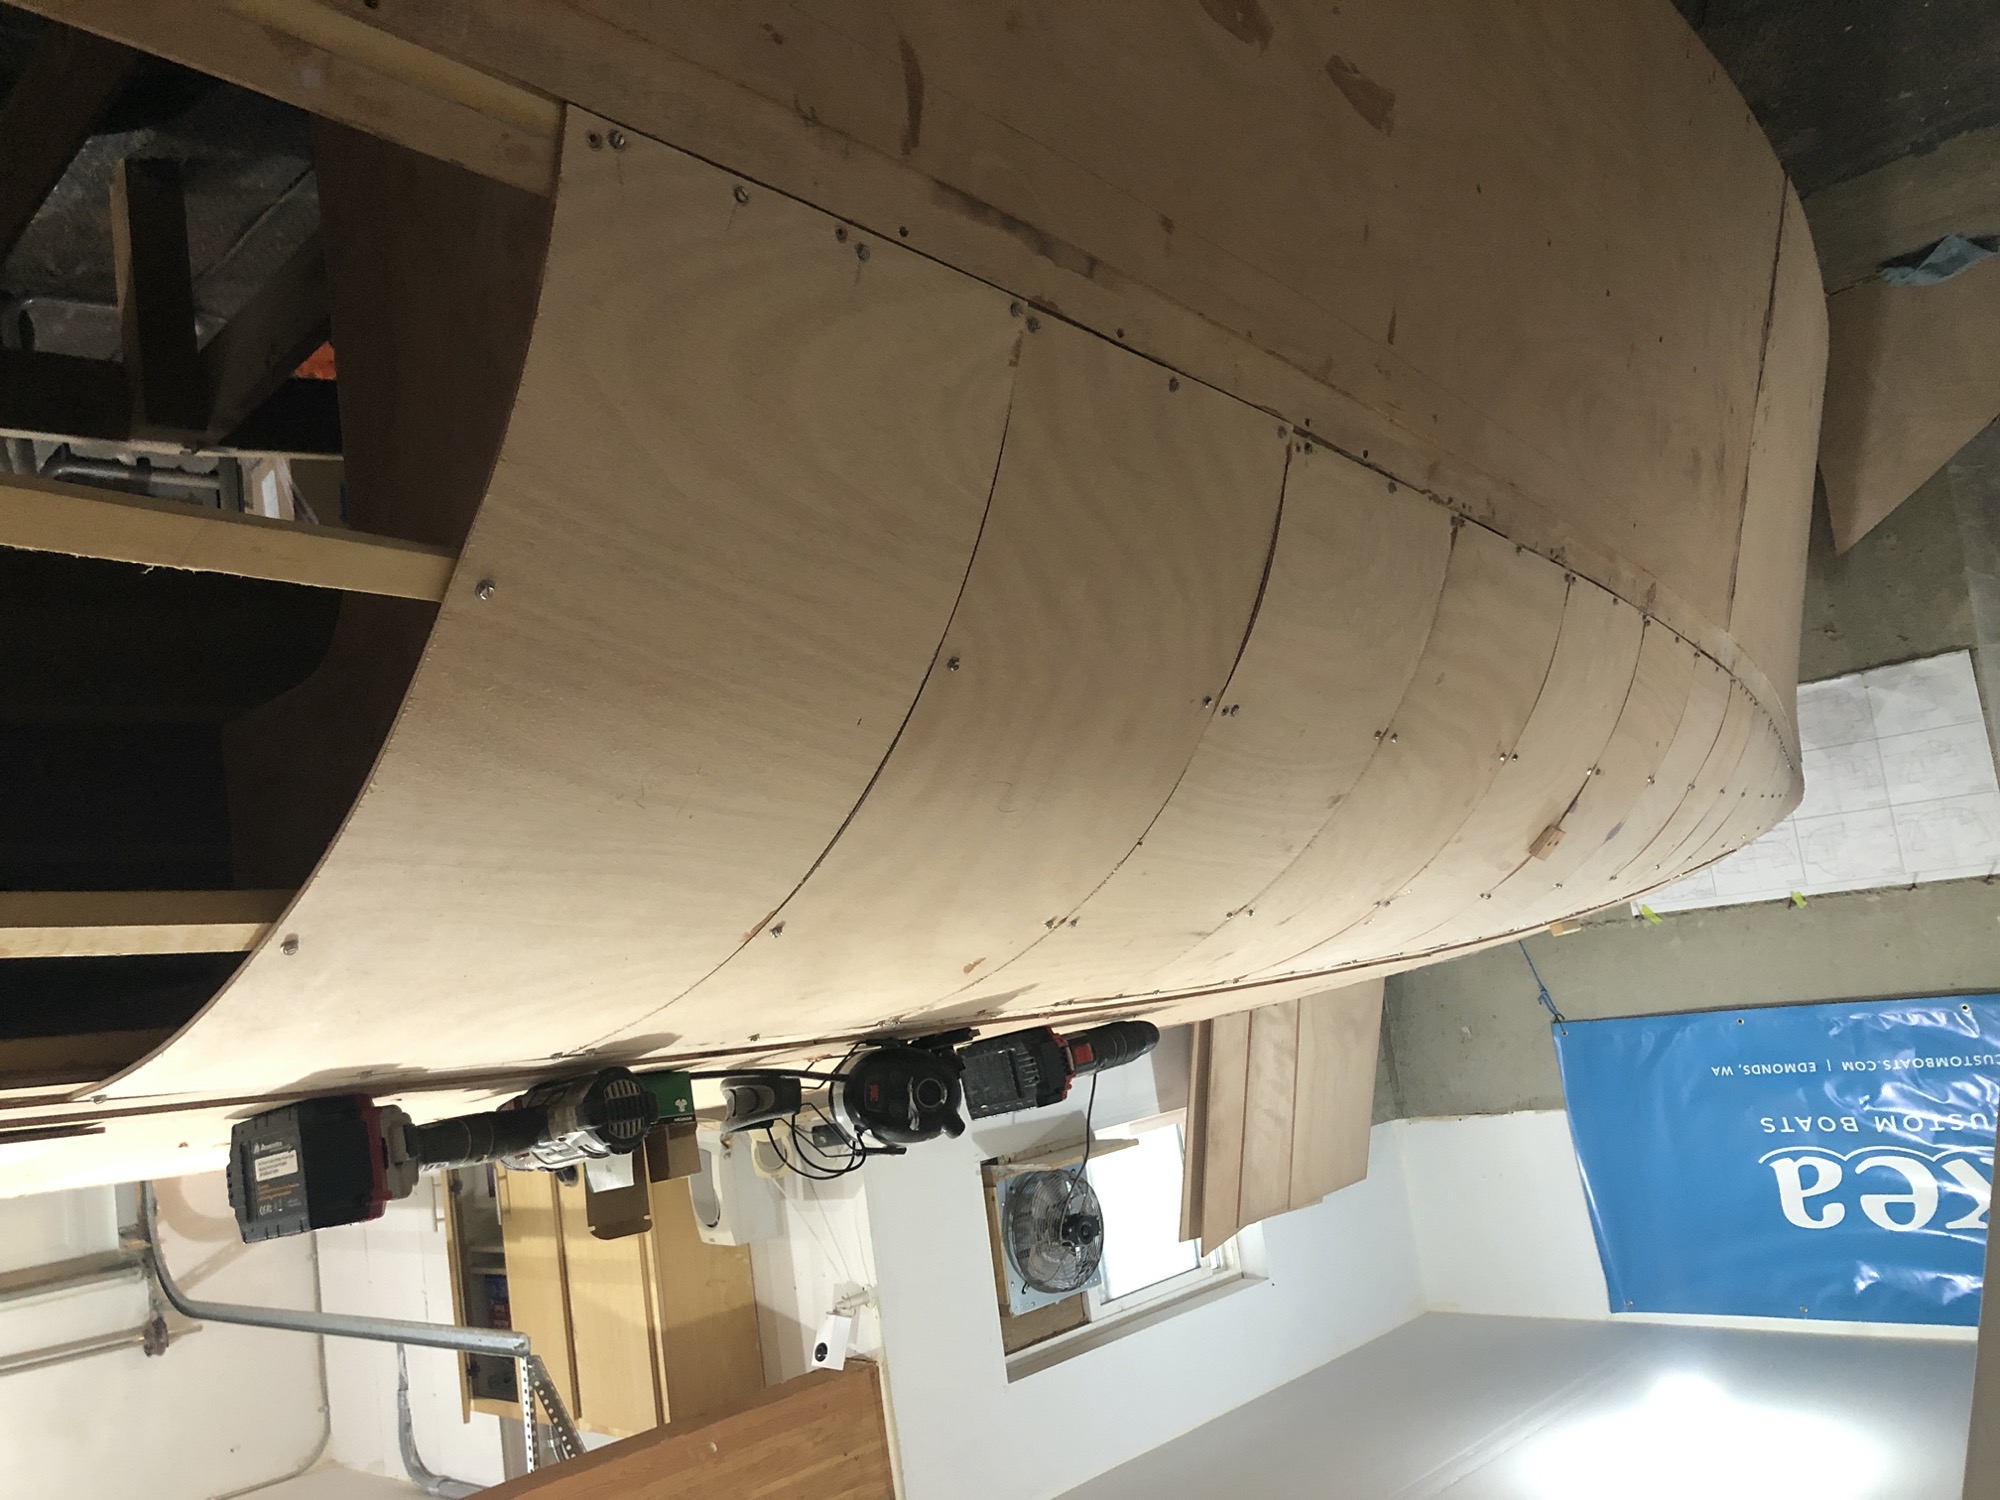  10/18/20 - The starboard side panels.  